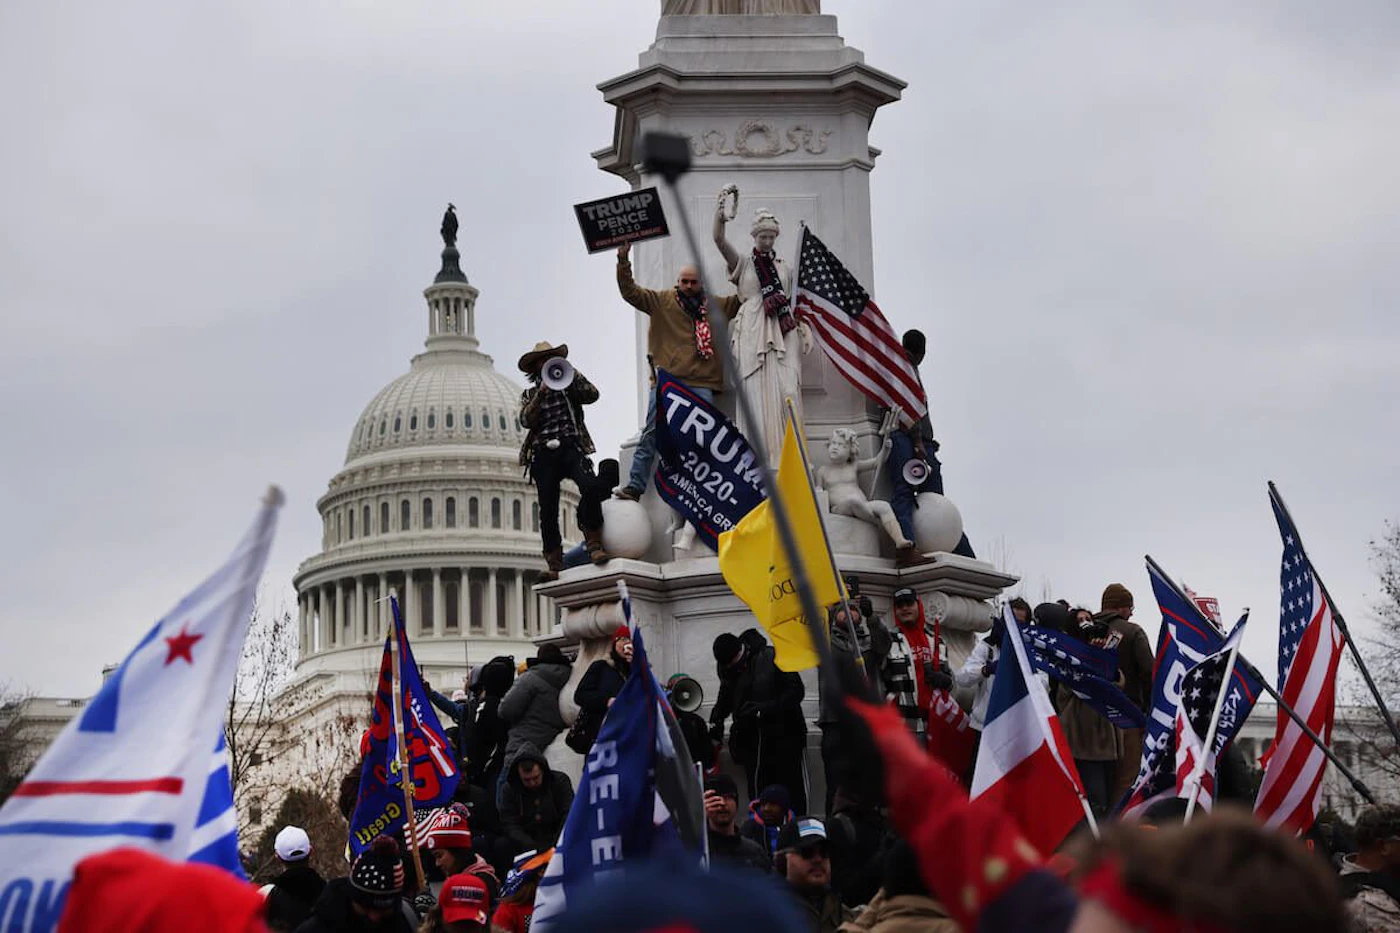 Supporters of President Donald Trump surround the U.S. Capitol following a rally on January 6, 2021 in Washington, DC. Trump supporters gathered in the nation's capital today to protest the ratification of President-elect Joe Biden's Electoral College victory over President Trump in the 2020 election. (Photo by Samuel Corum/Getty Images)